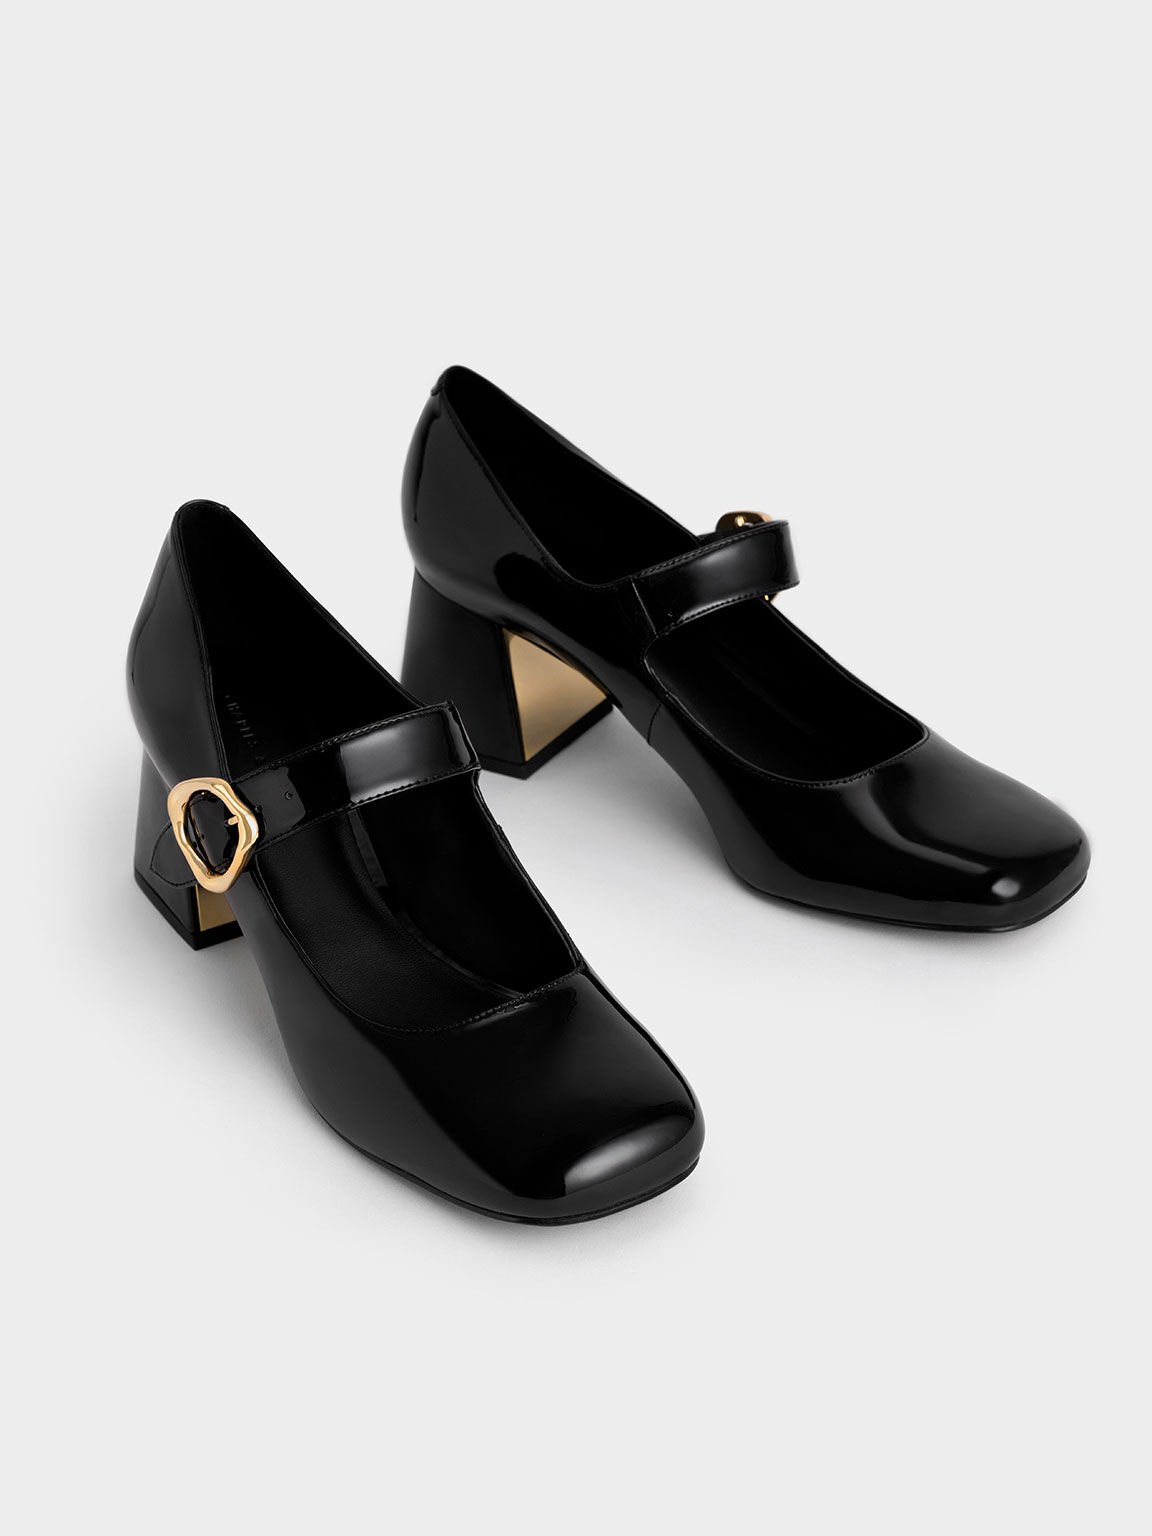 KEEL black patent leather Mary Janes pumps